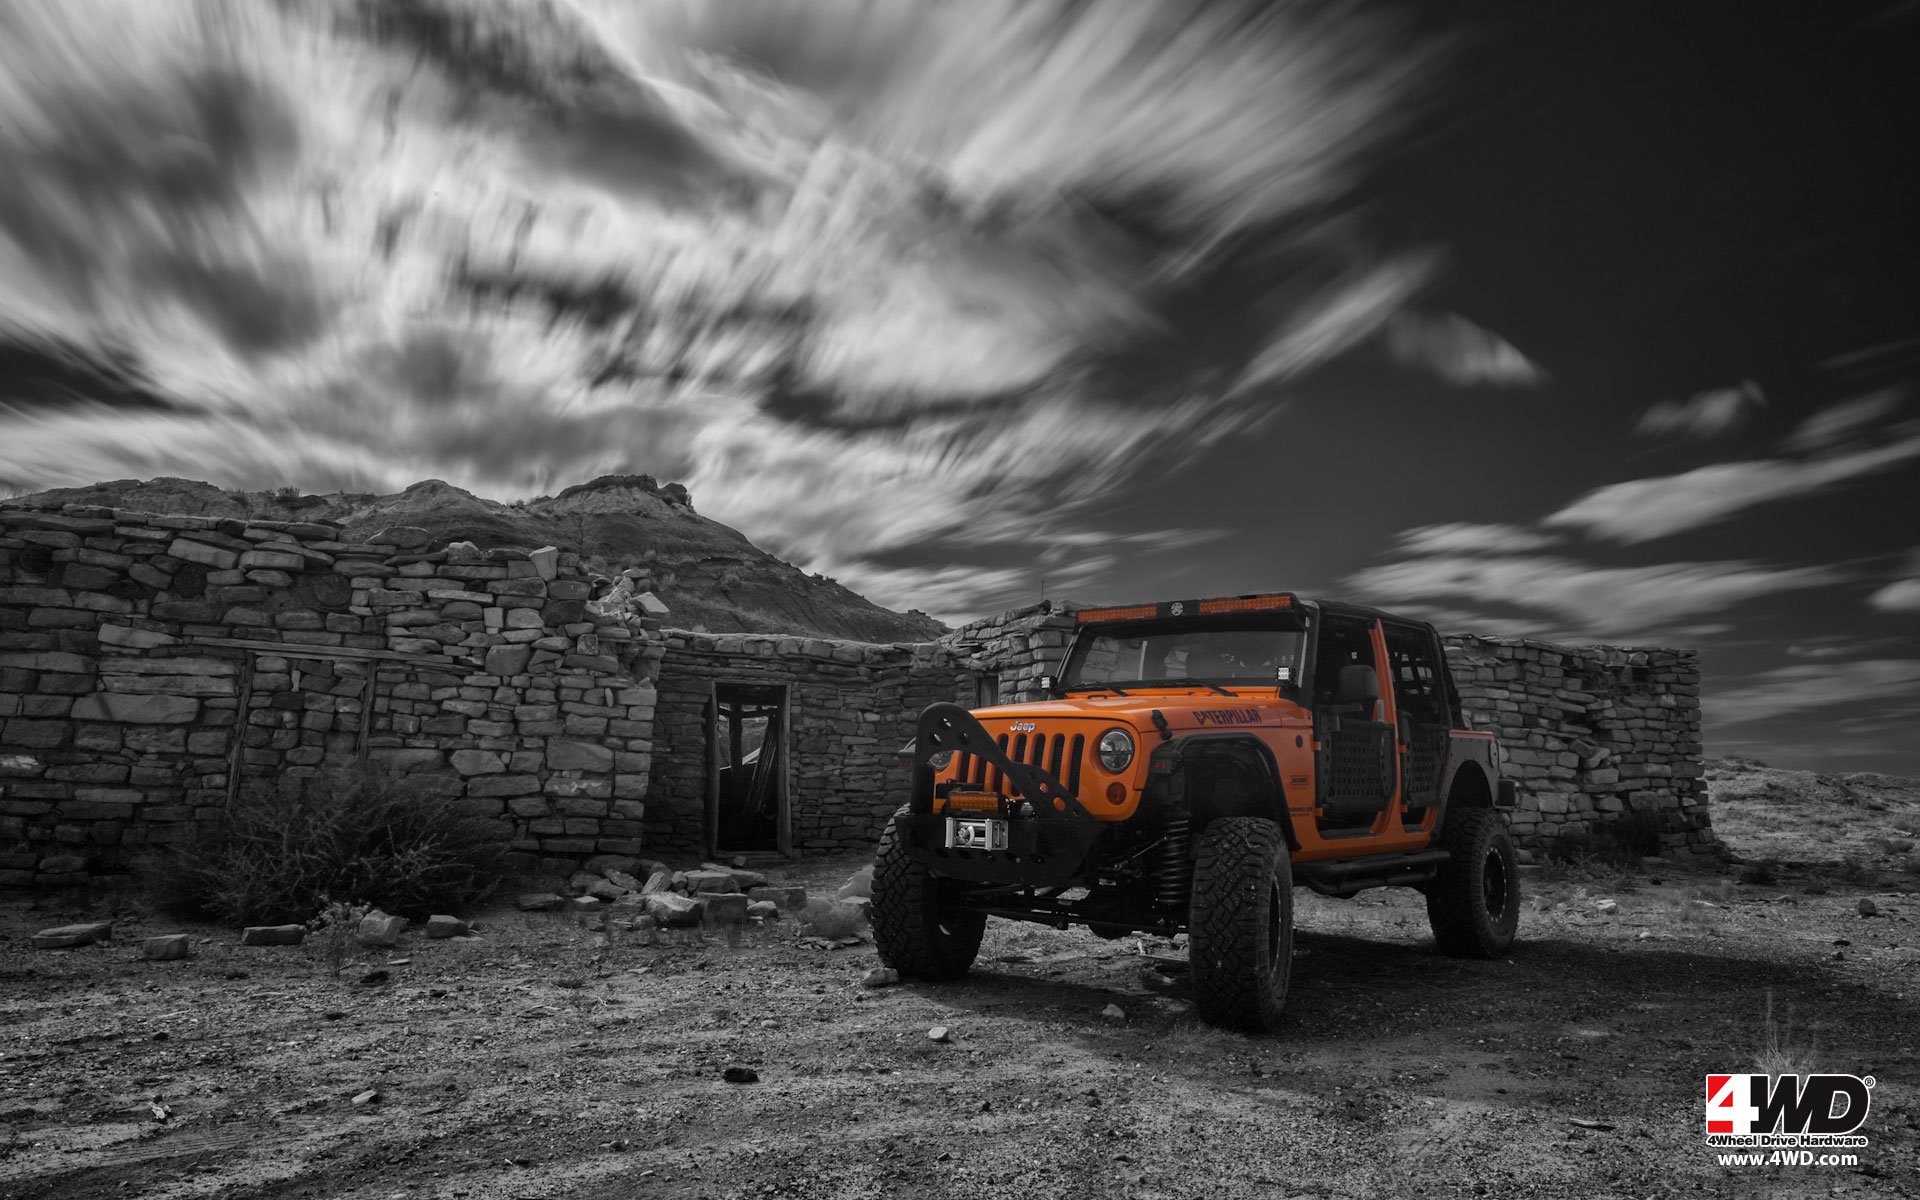 Jeep Wallpapers | 4WD.com